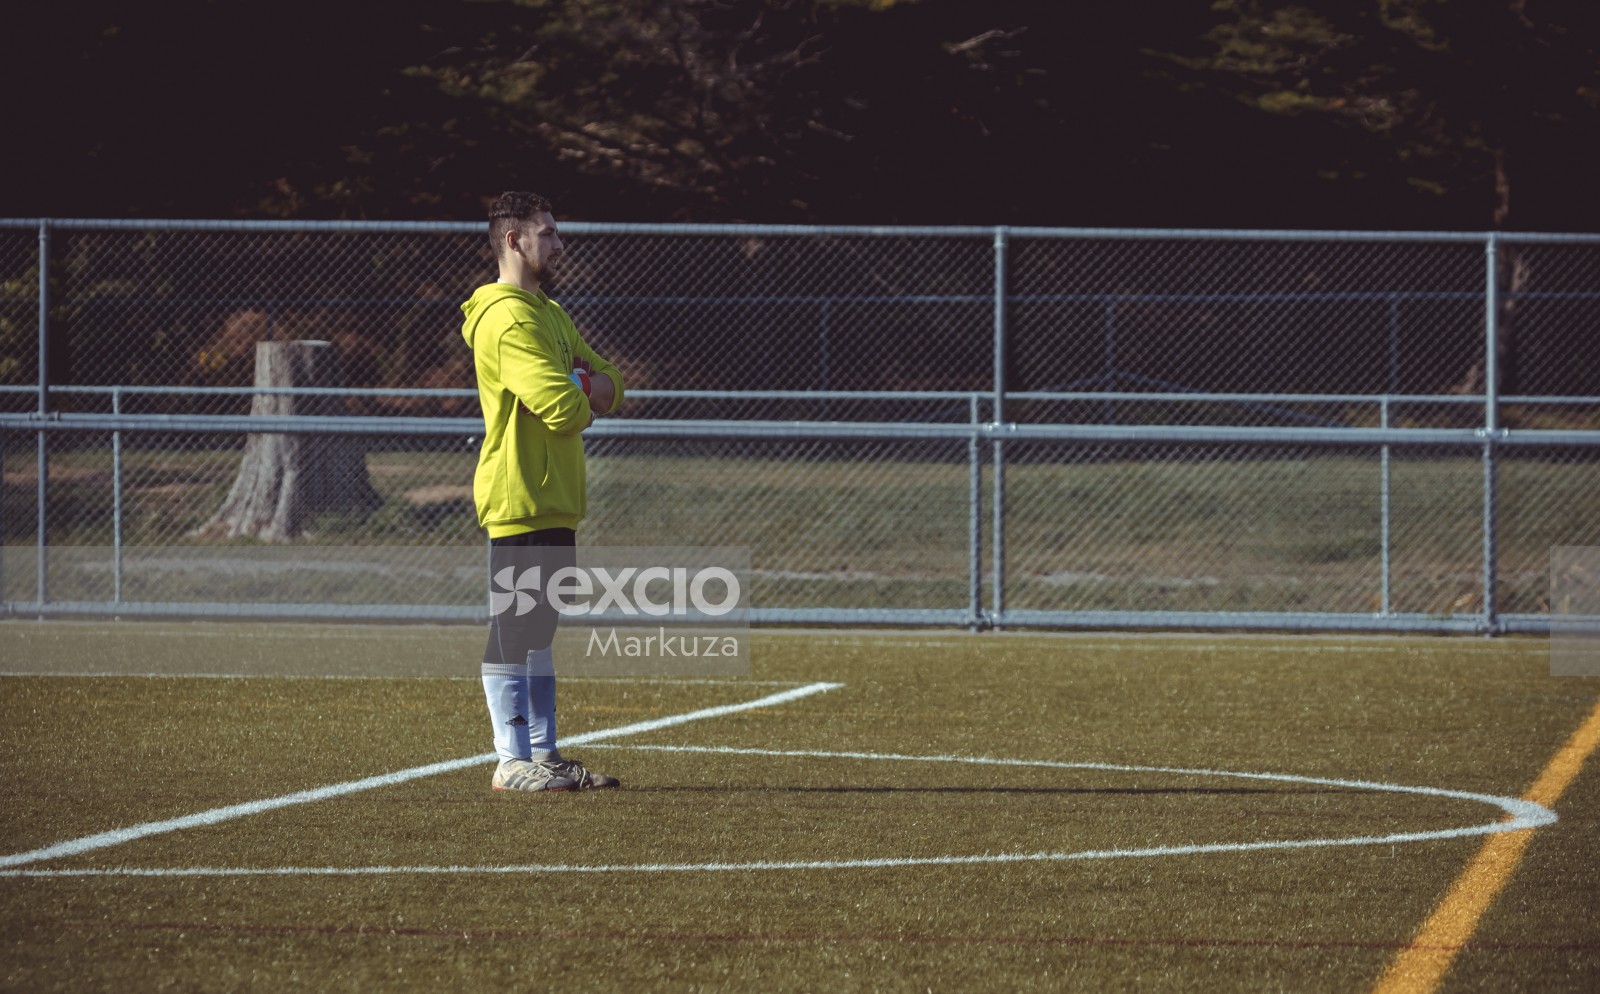 Goalkeeper standing crossed arms - Sports Zone sunday league